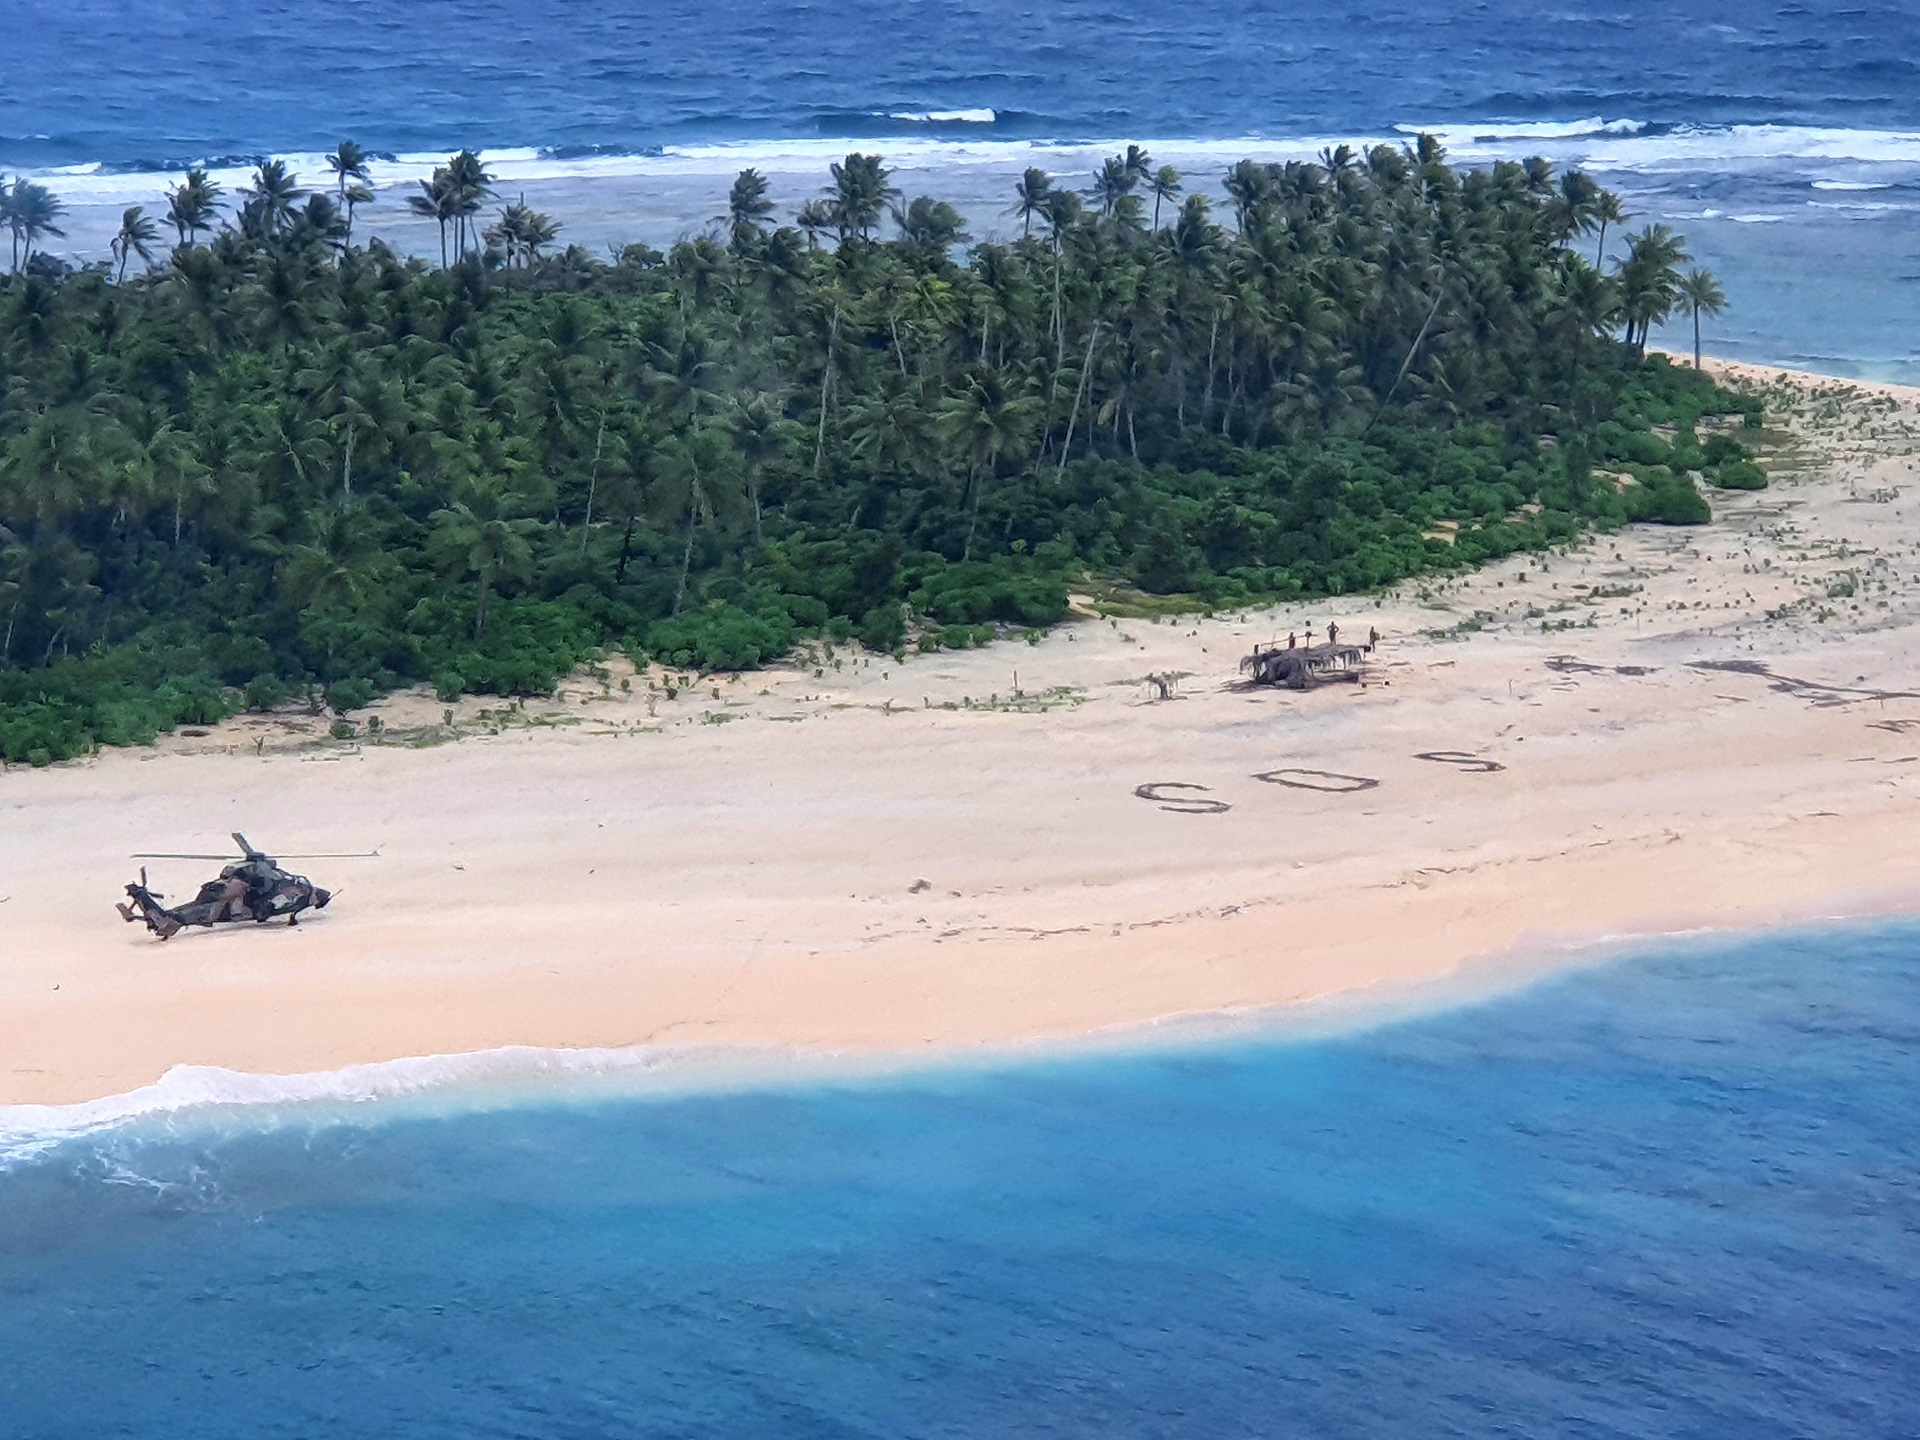 epa08582829 A handout photo made available by the Australian Department of Defence shows an Australian Army ARH-90 Tiger Helicopter landing on Pikelot Island in the Federated States of Micronesia, 02 August 2020 (issued 04 August 2020), where three men were found safe and healthy after missing for three days. Their SOS message outlined on a beach was spotted from the air by Australian and US aircraft searching the area.  EPA/AUSTRALIAN DEFENCE FORCE HANDOUT -- MANDATORY CREDIT: COMMONWEALTH OF AUSTRALIA 2020 -- HANDOUT EDITORIAL USE ONLY/NO SALES *** Local Caption *** HMAS Canberra and its embarked aviation assets have assisted in locating the three-person crew of a skiff that had been missing for nearly three days in waters off the Federated States of Micronesia. The men were found on 2 August in good condition on Pikelot Island, 190 kilometres west of where they had set off in their 23-foot (seven-metre) skiff on 30 July. Their SOS message outlined on a beach was spotted from the air by Australian and US aircraft searching the area. 

The Australian Defence Force had been asked for search and rescue support by the Rescue and Coordination Centre (RCC) in Guam on the afternoon of 1 August 2020. 

A US Air Force KC-135 aircraft located a rudimentary SOS sign on the beach, which queued HMAS Canberra and her embarked helicopters to locate the missing sailors. A US Coast Guard C-130 aircraft also assisted in the search, providing supplies and communications through an air drop.